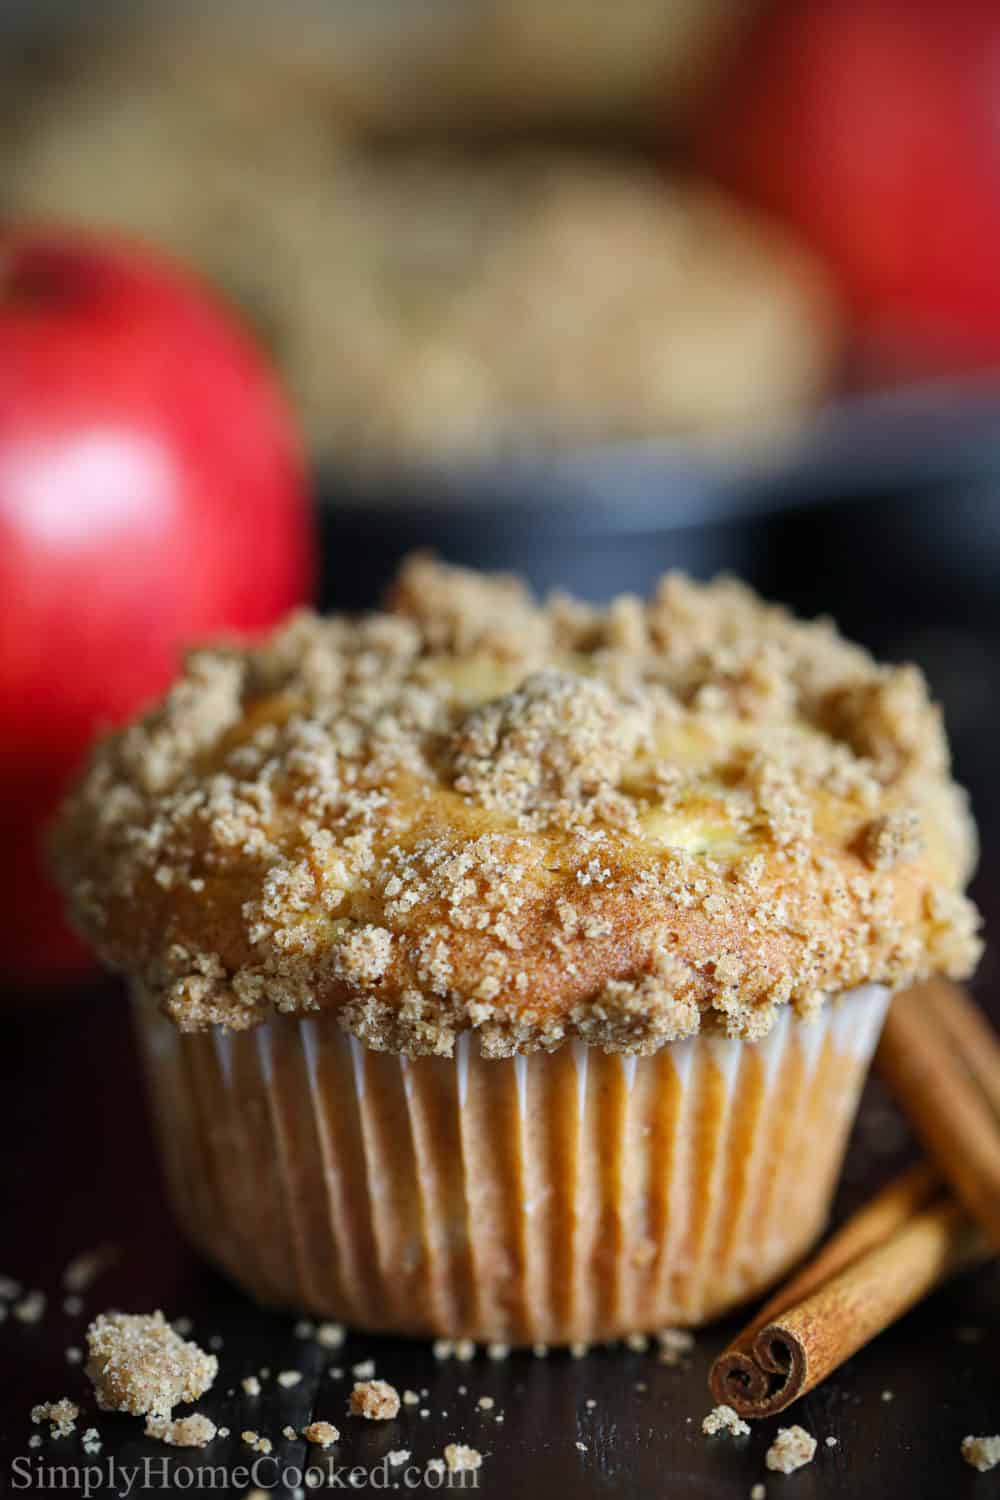 Cinnamon Apple Muffins Recipe (VIDEO) - Simply Home Cooked